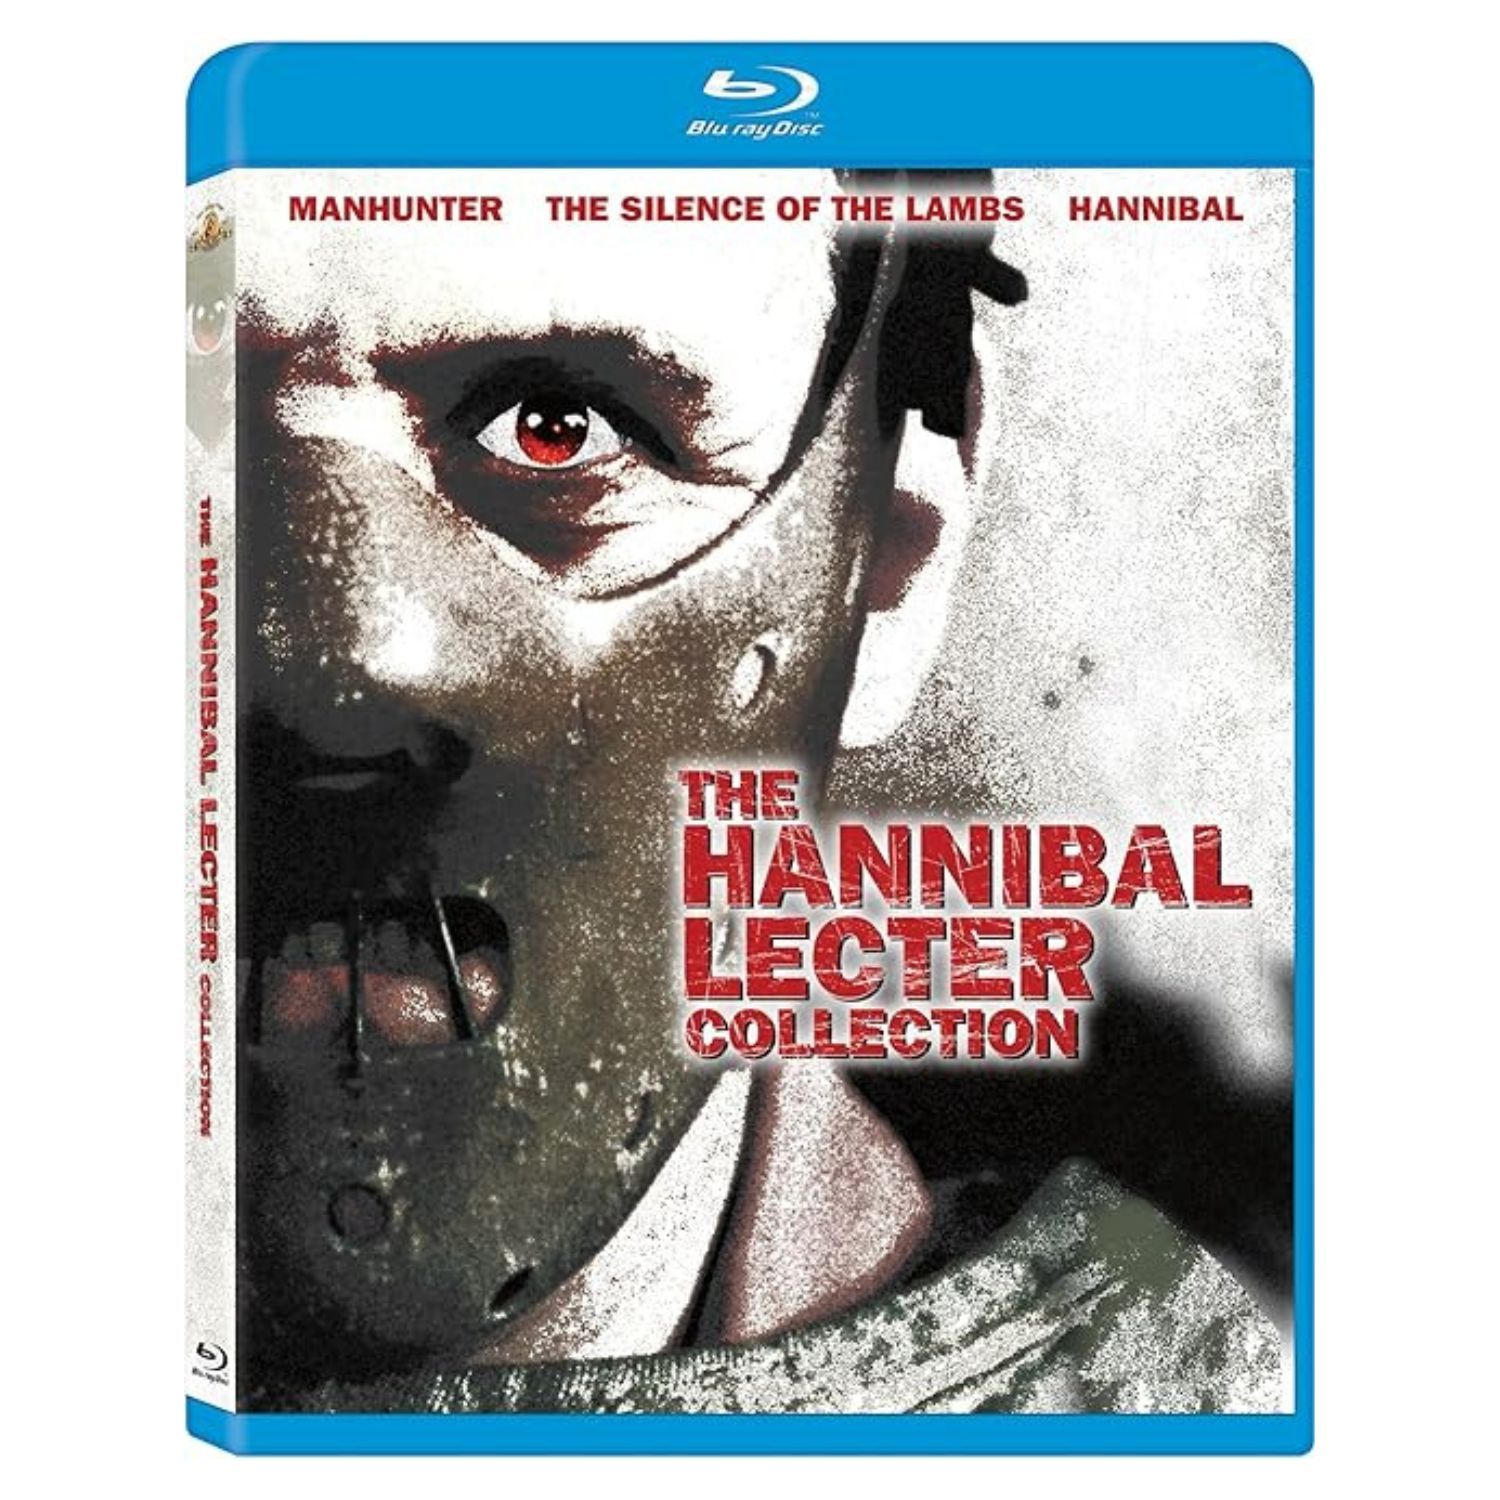 The Hannibal Lecter Collection on Blu-ray 